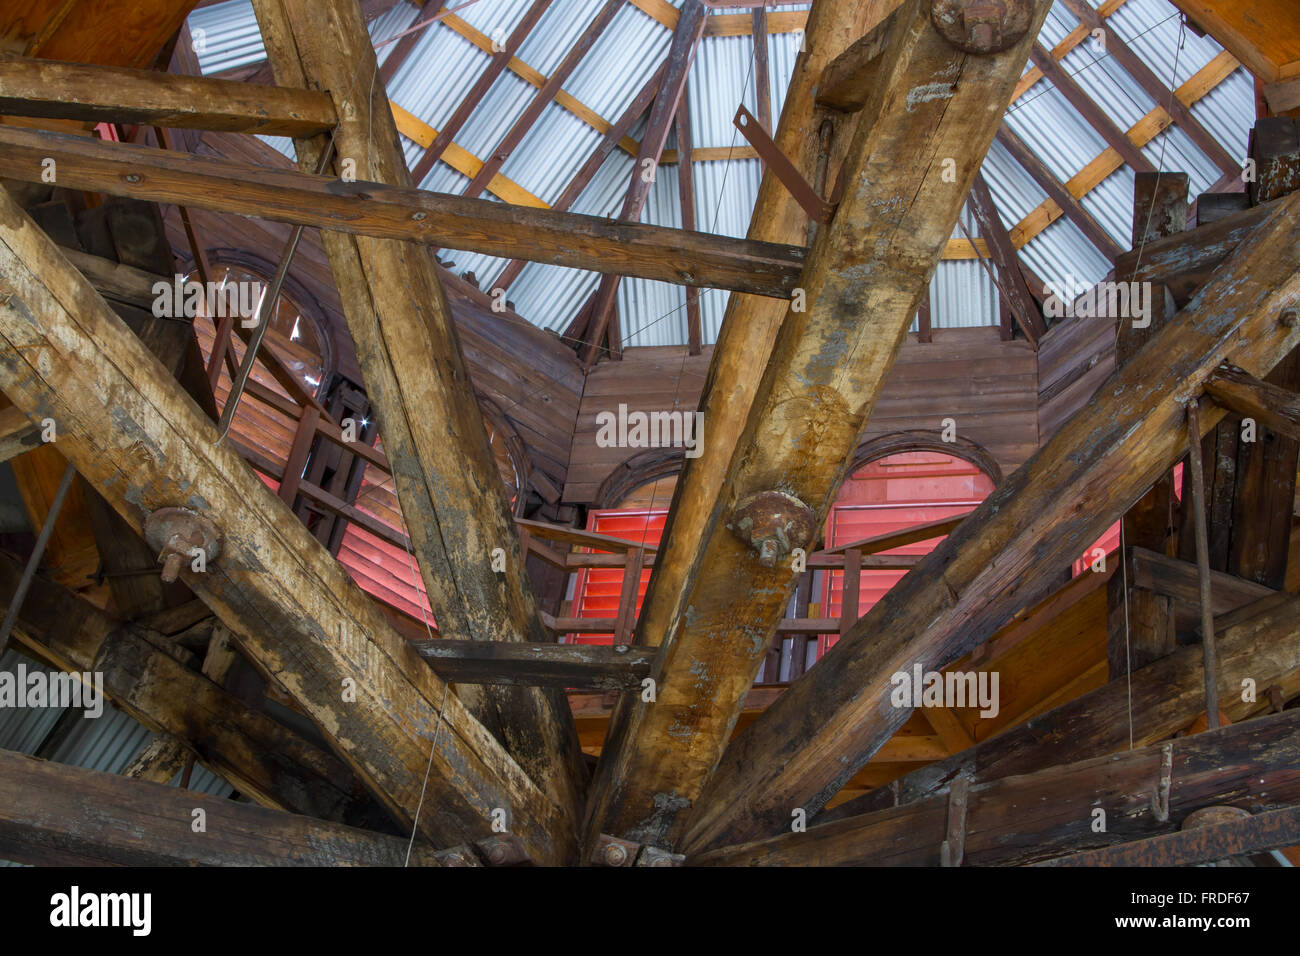 Aged and worn wooden rafters with rusting metal girders inside decaying building. Stock Photo